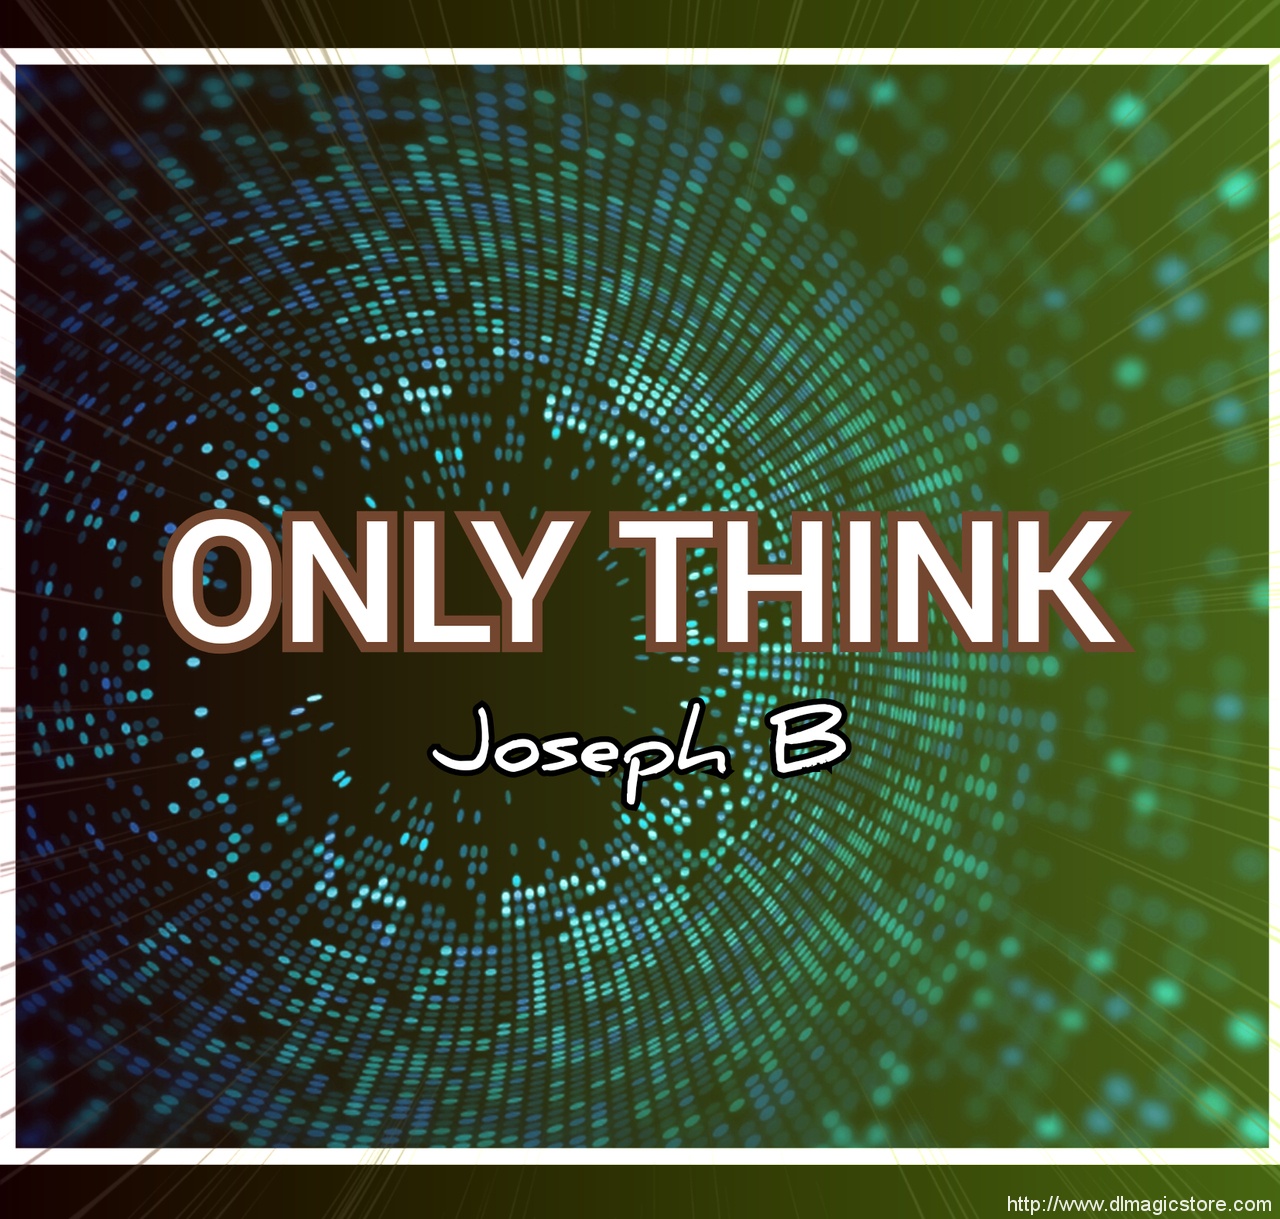 ONLY THINK By Joseph B. (Instant Download)